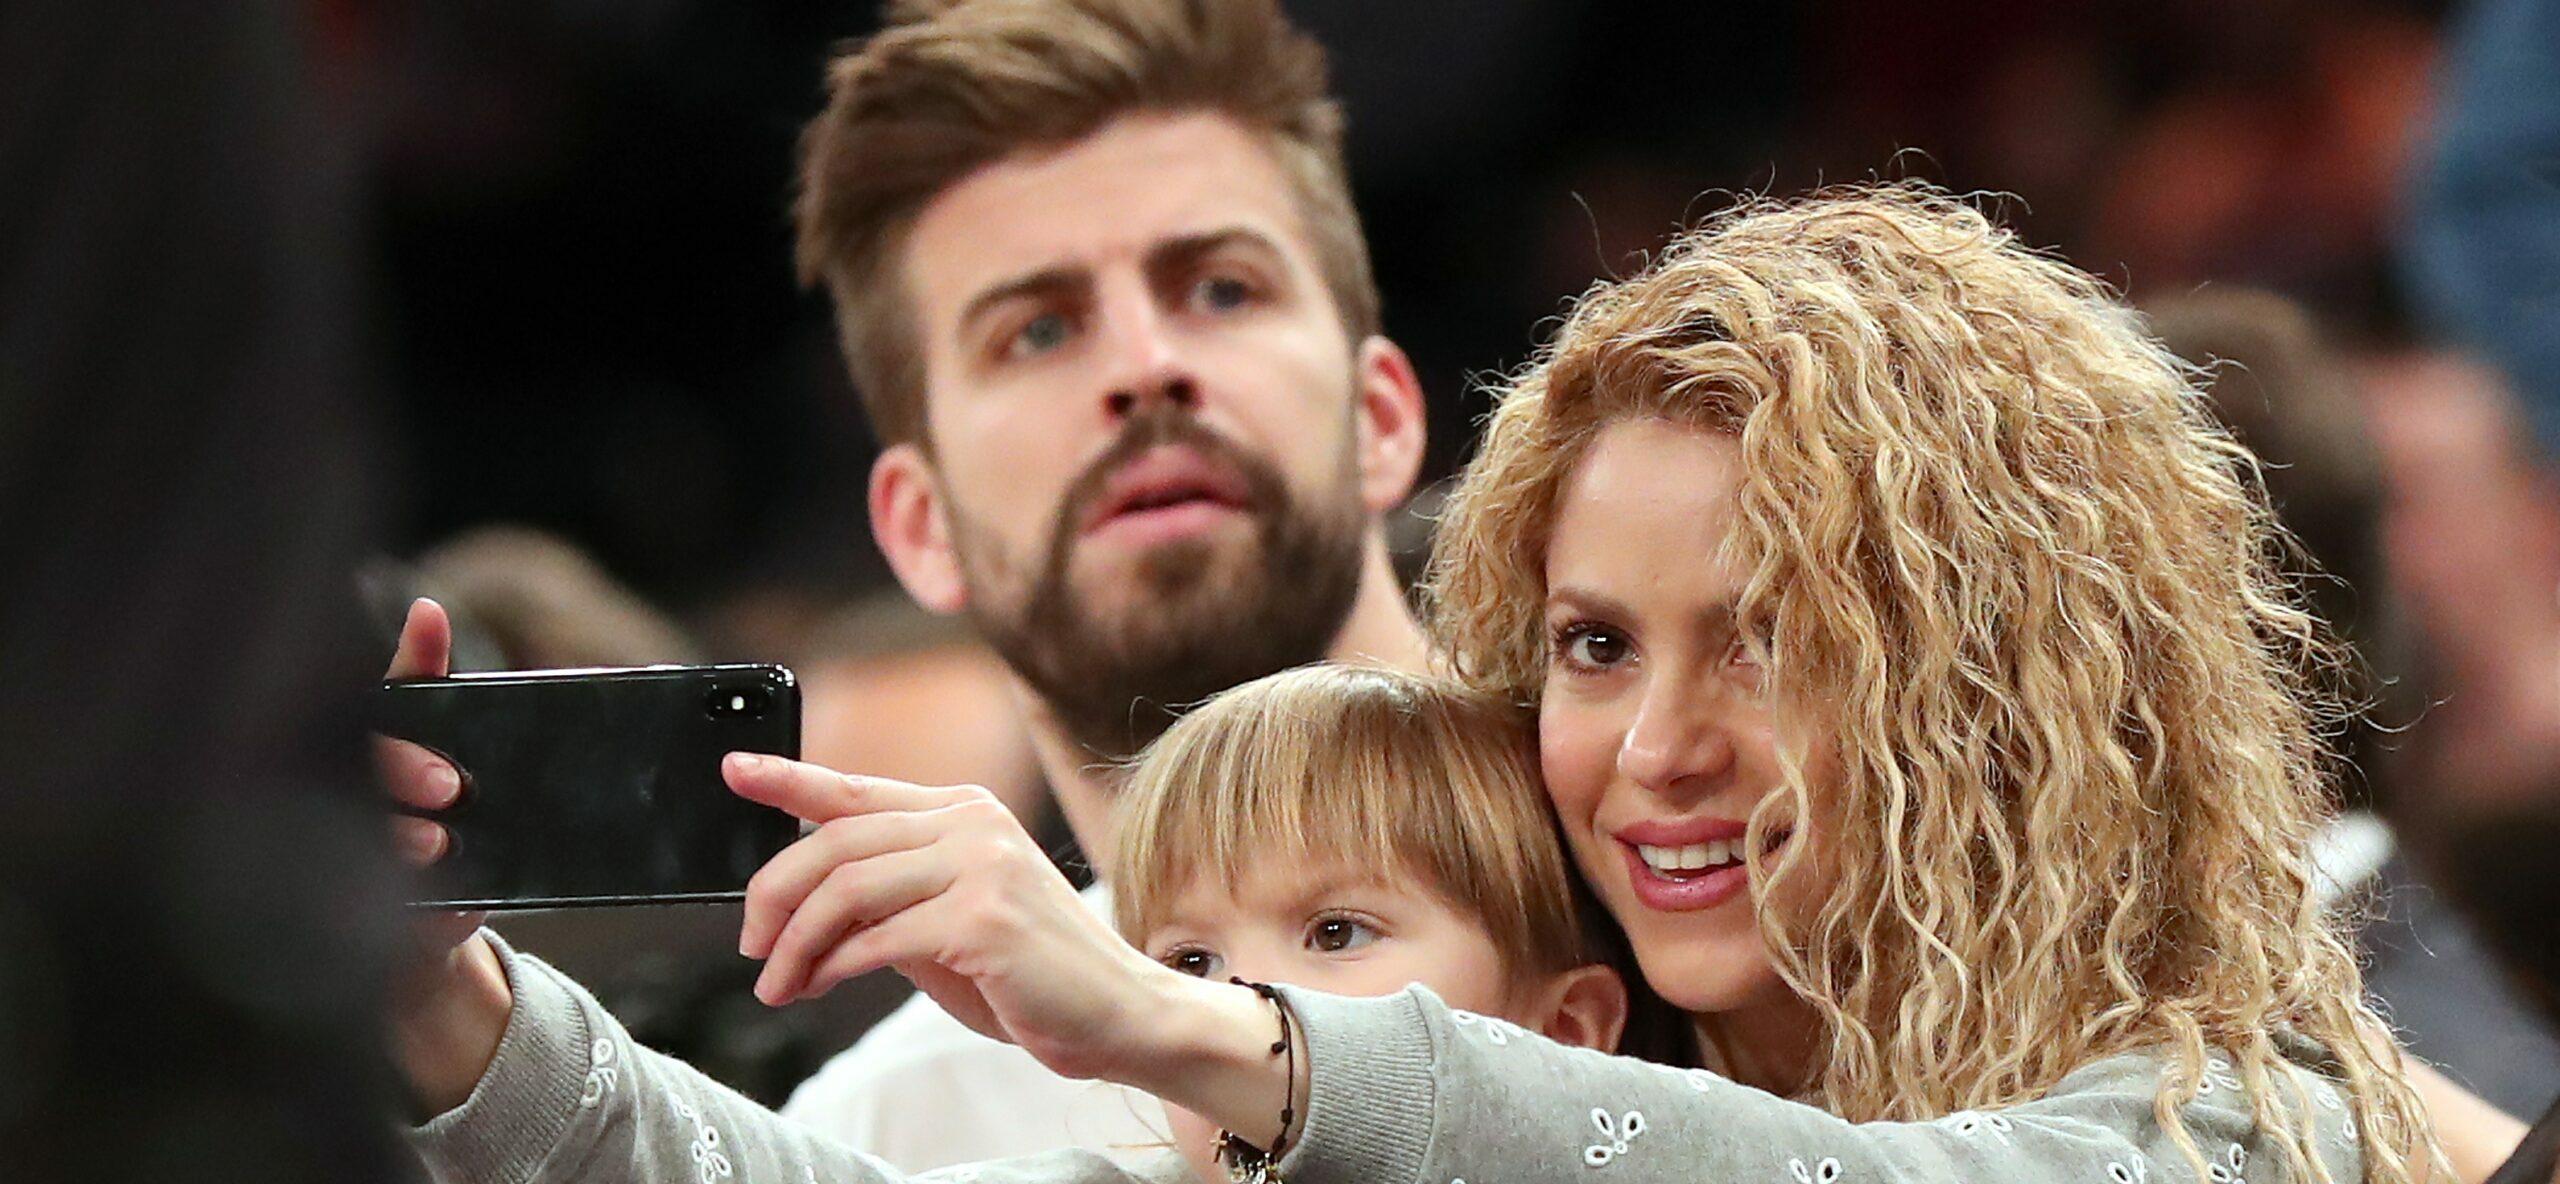 Christmas Day game between the New York Knicks and. Philadelphia 76ers at Madison Square Garden - Shakira, Gerard Pique and Chris Rock were among the celebs in attendance.***NO NEW YORK DAILY NEWS, NO NEW YORK TIMES, NO NEWSDAY***. 25 Dec 2017 Pictured: Gerard Piqué and his partner music artist Shakira sit court side with their two sons during the second quarter. Photo credit: Charles Wenzelberg/New York Post / MEGA TheMegaAgency.com +1 888 505 6342 (Mega Agency TagID: MEGA137557_021.jpg) [Photo via Mega Agency]